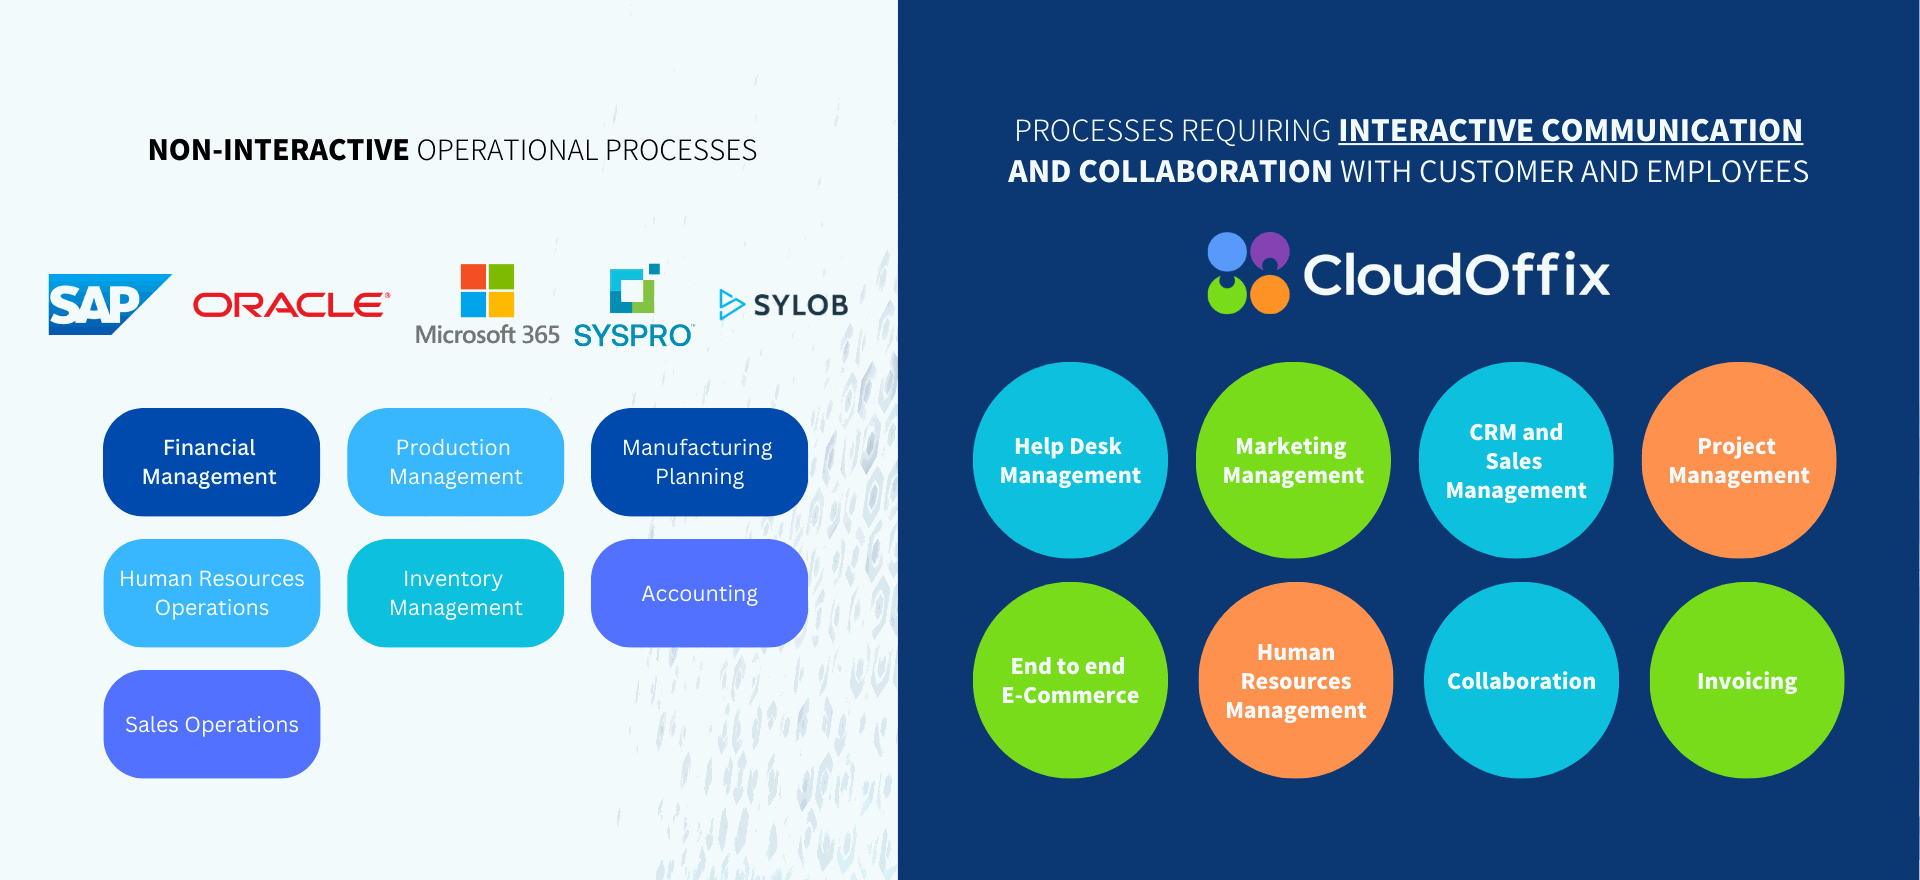 The image compares non-interactive operational processes managed by traditional ERP systems with processes requiring interactive communication and collaboration managed by CloudOffix.